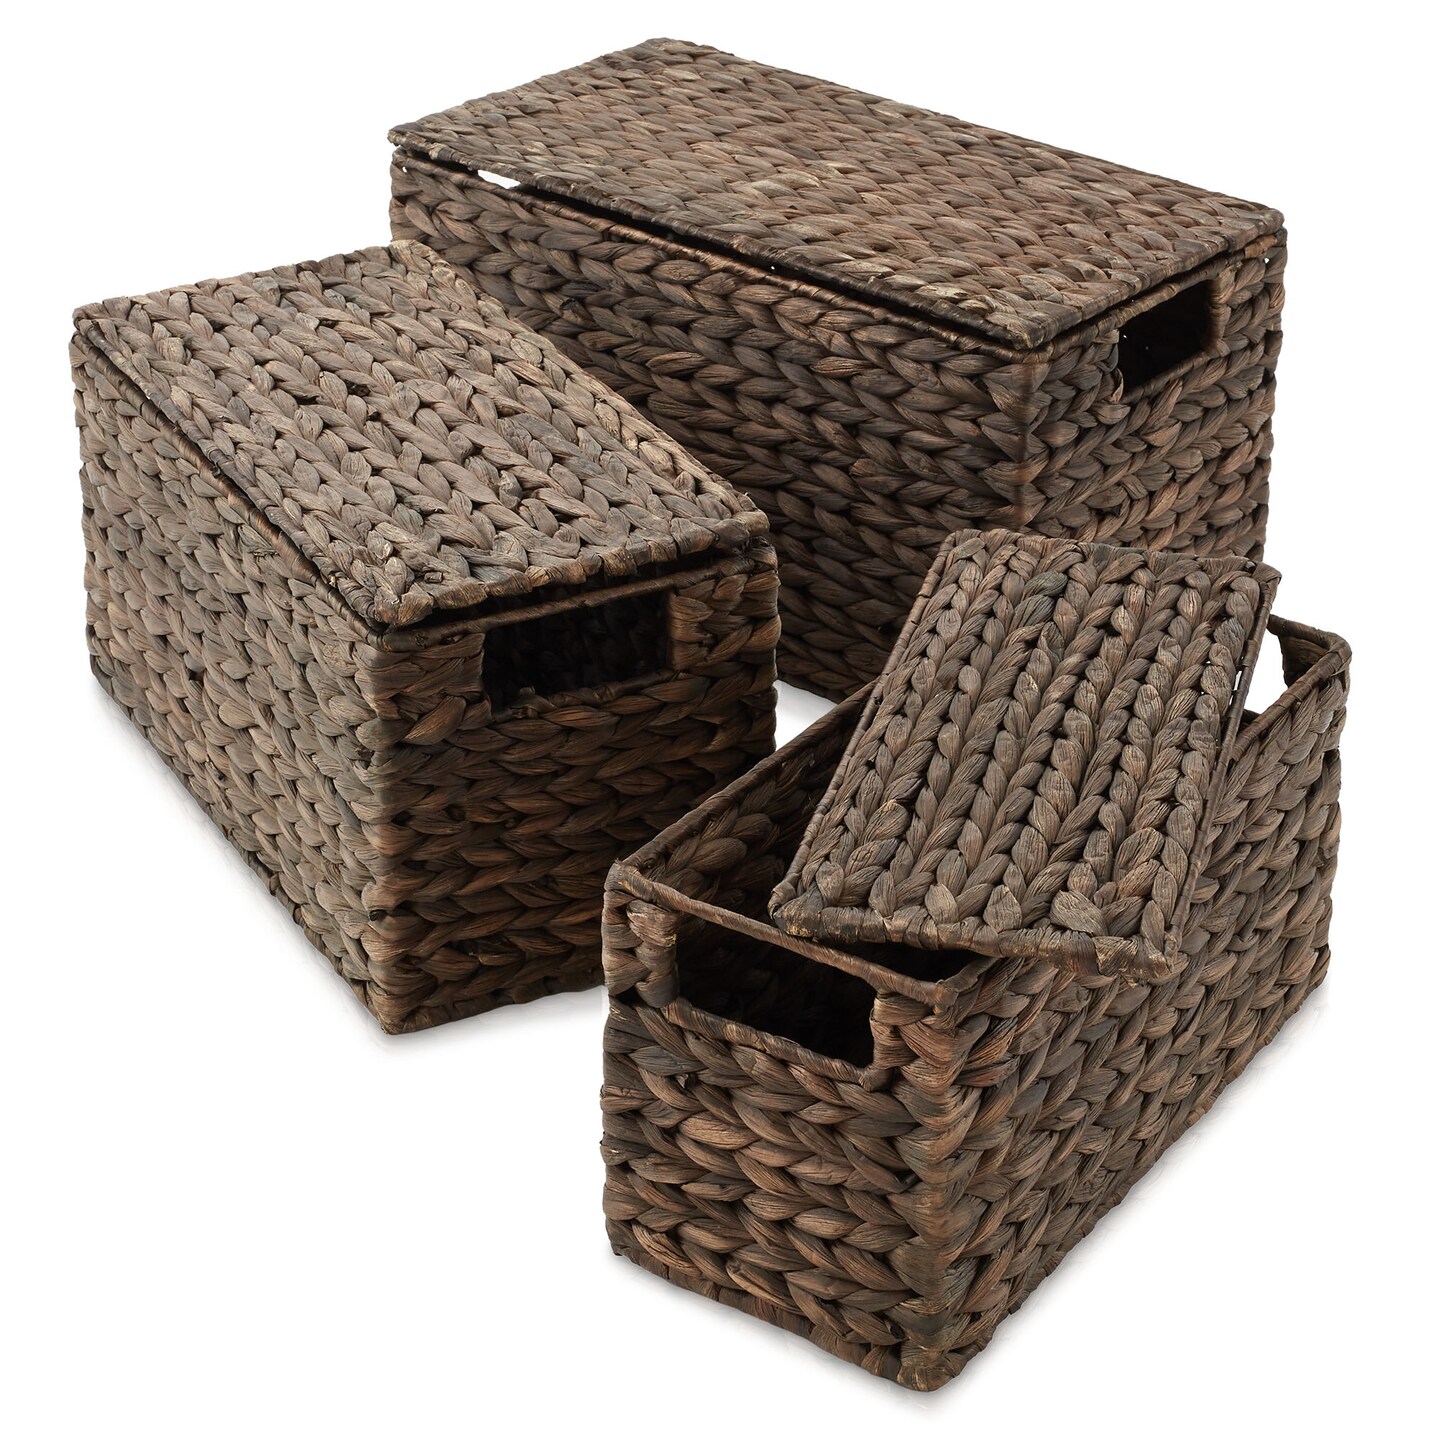 Casafield (Set of 3) Water Hyacinth Storage Baskets with Lids - Small, Medium, Large Woven Nesting Bins for Bathroom, Bedroom, Closets, Shelves